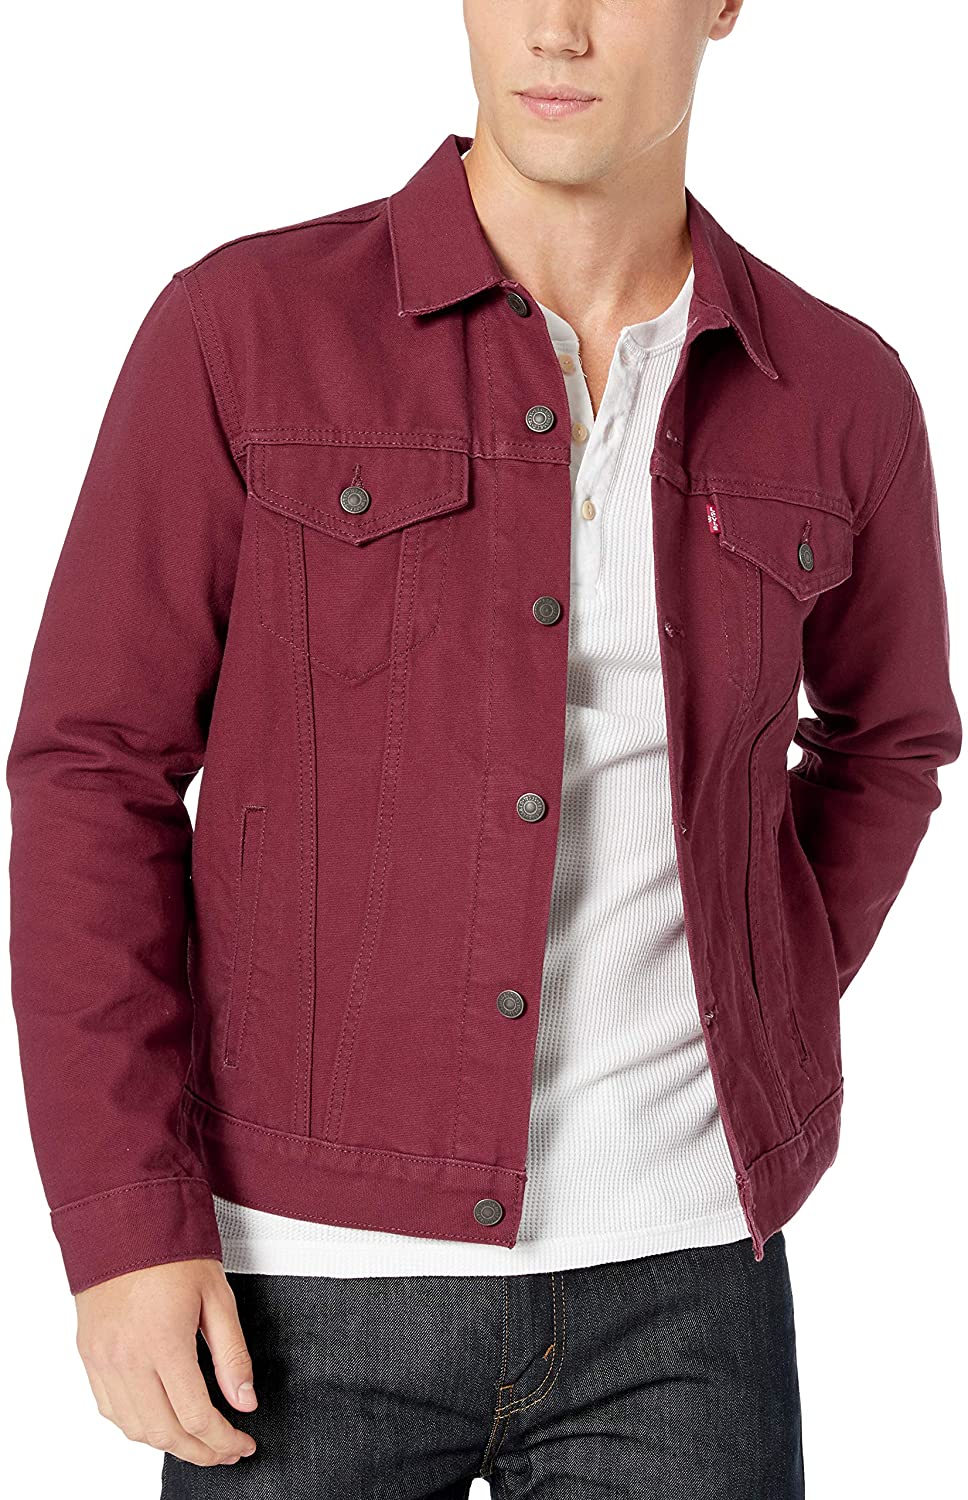 Under $50 For These Levi's Jean Jackets at the Amazon Summer Sale ...